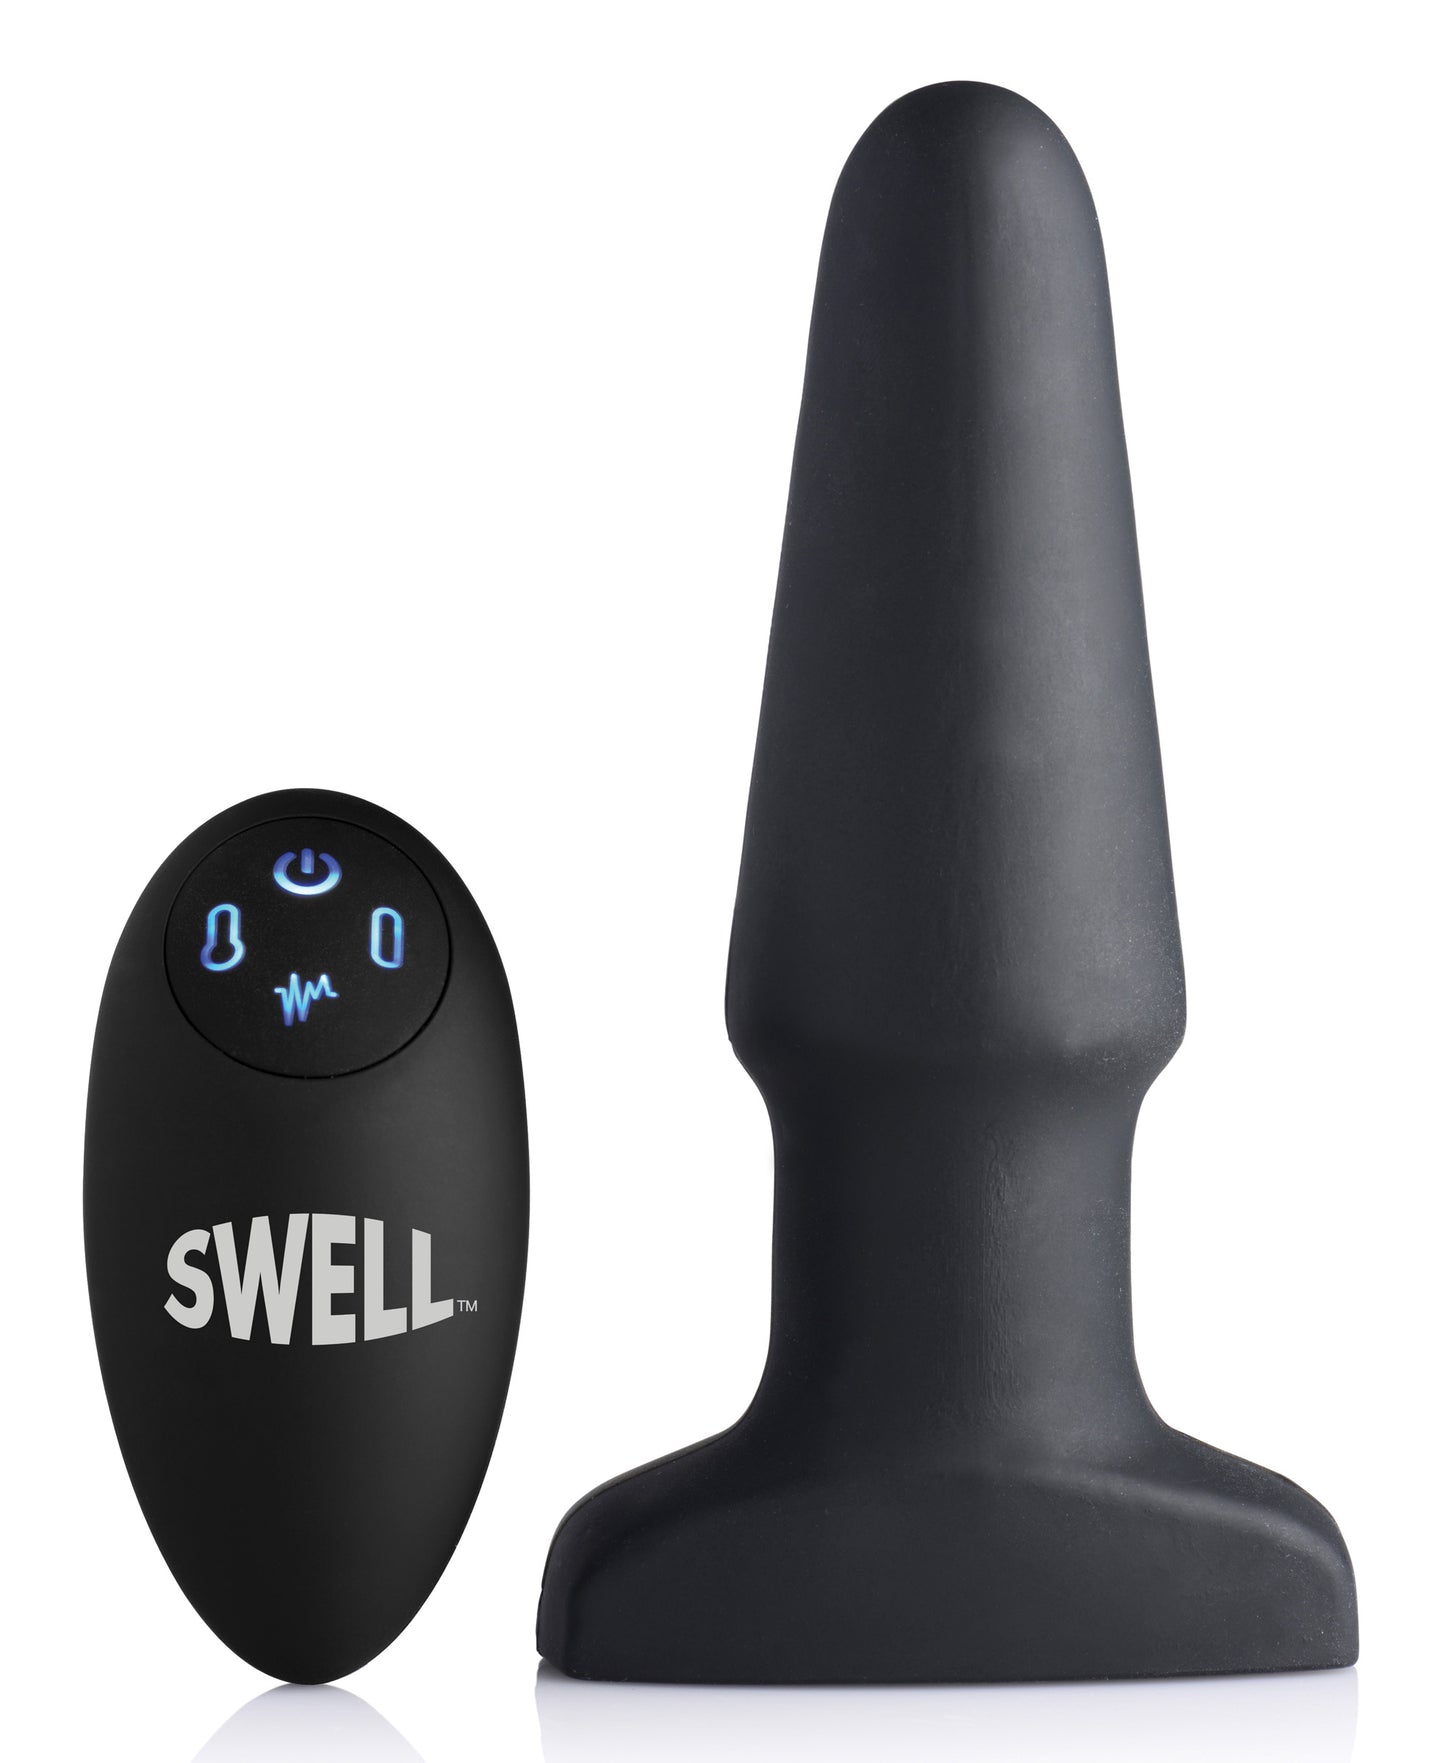 Worlds First Remote Control Inflatable 10X Vibrating Silicone Anal Plug - UABDSM